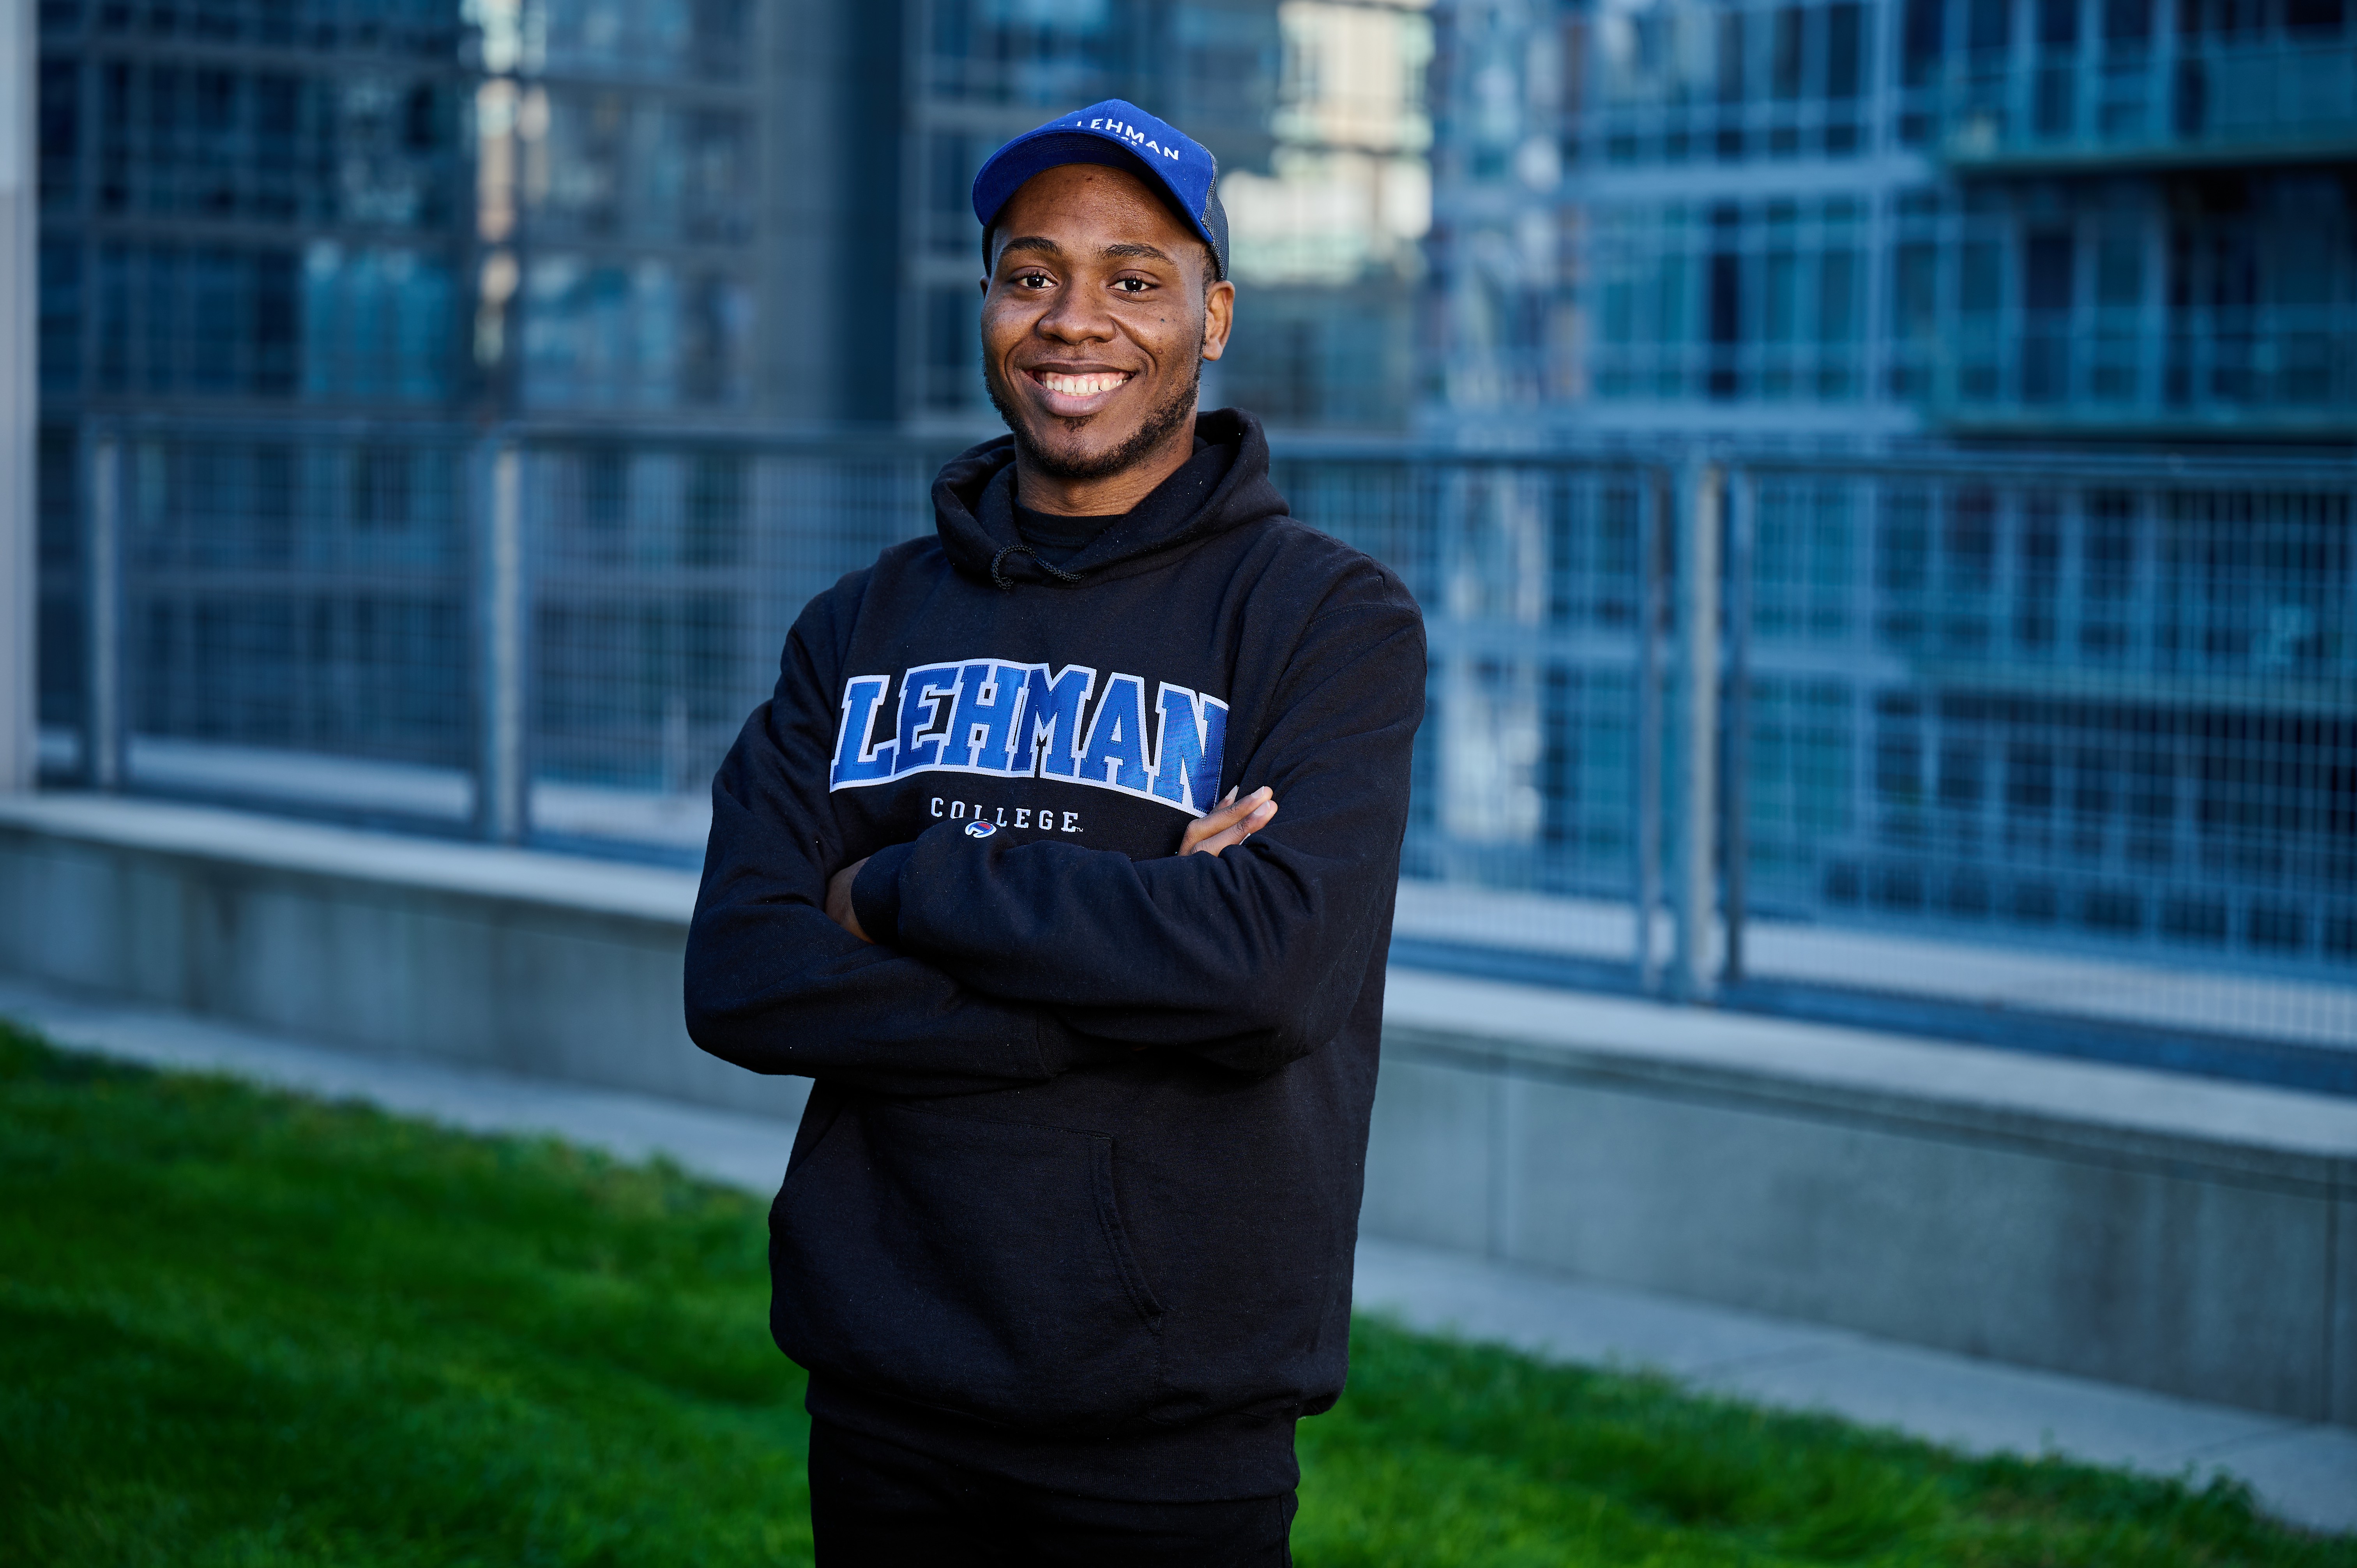 A student posing in front of a building. He is wearing a blue baseball cap and a Lehman College sweatshirt.